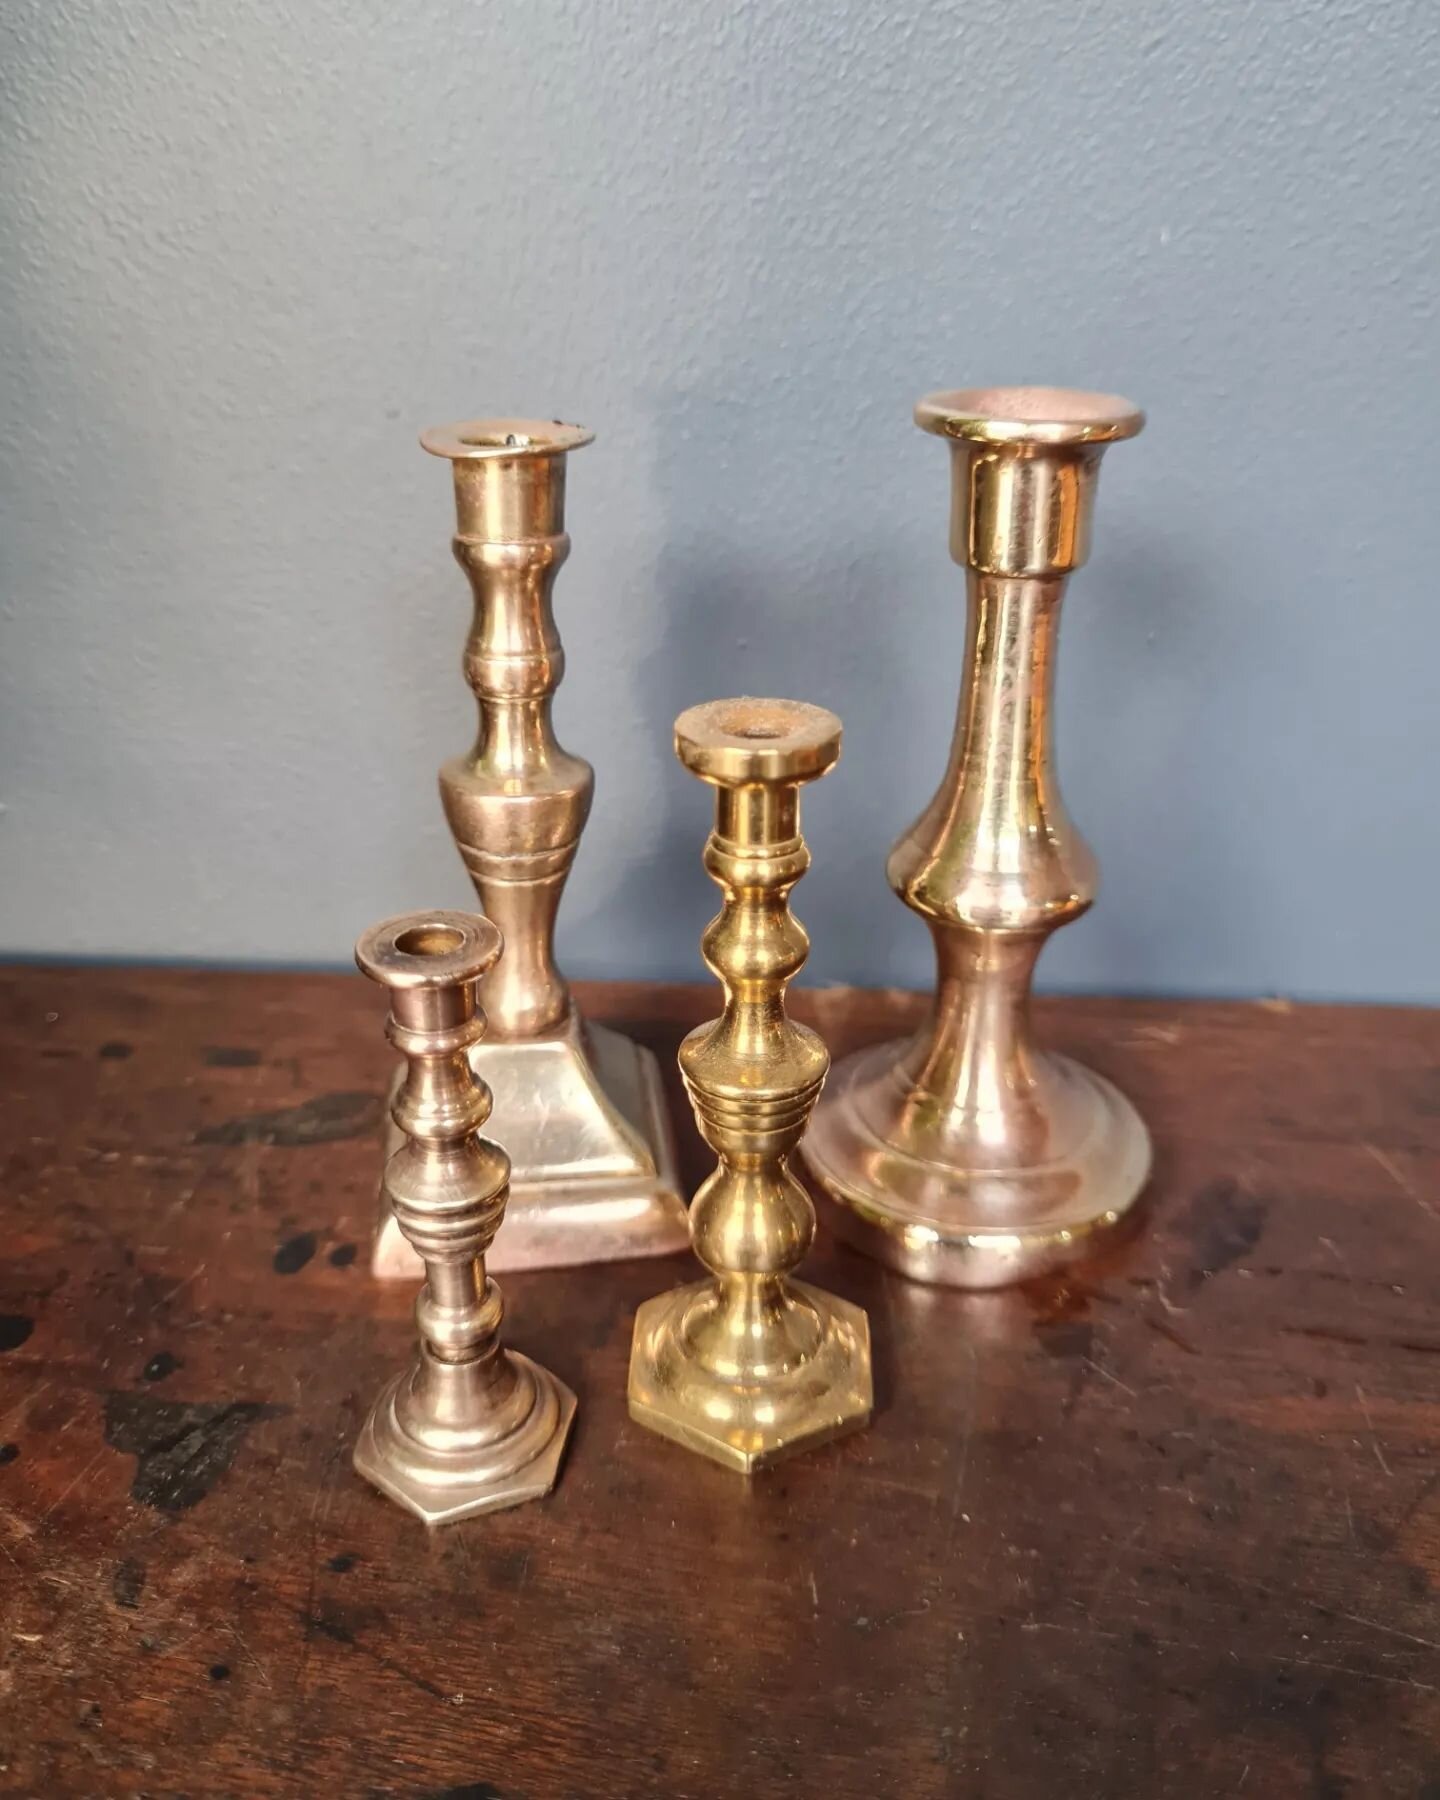 Collection of very small antique &amp; vintage candlesticks.&nbsp; All brass.&nbsp; $35
Postage $9.70 Australia wide.
Comment sold to purchase &amp; we will reply &amp; message to confirm.
We are always happy to combine postage.